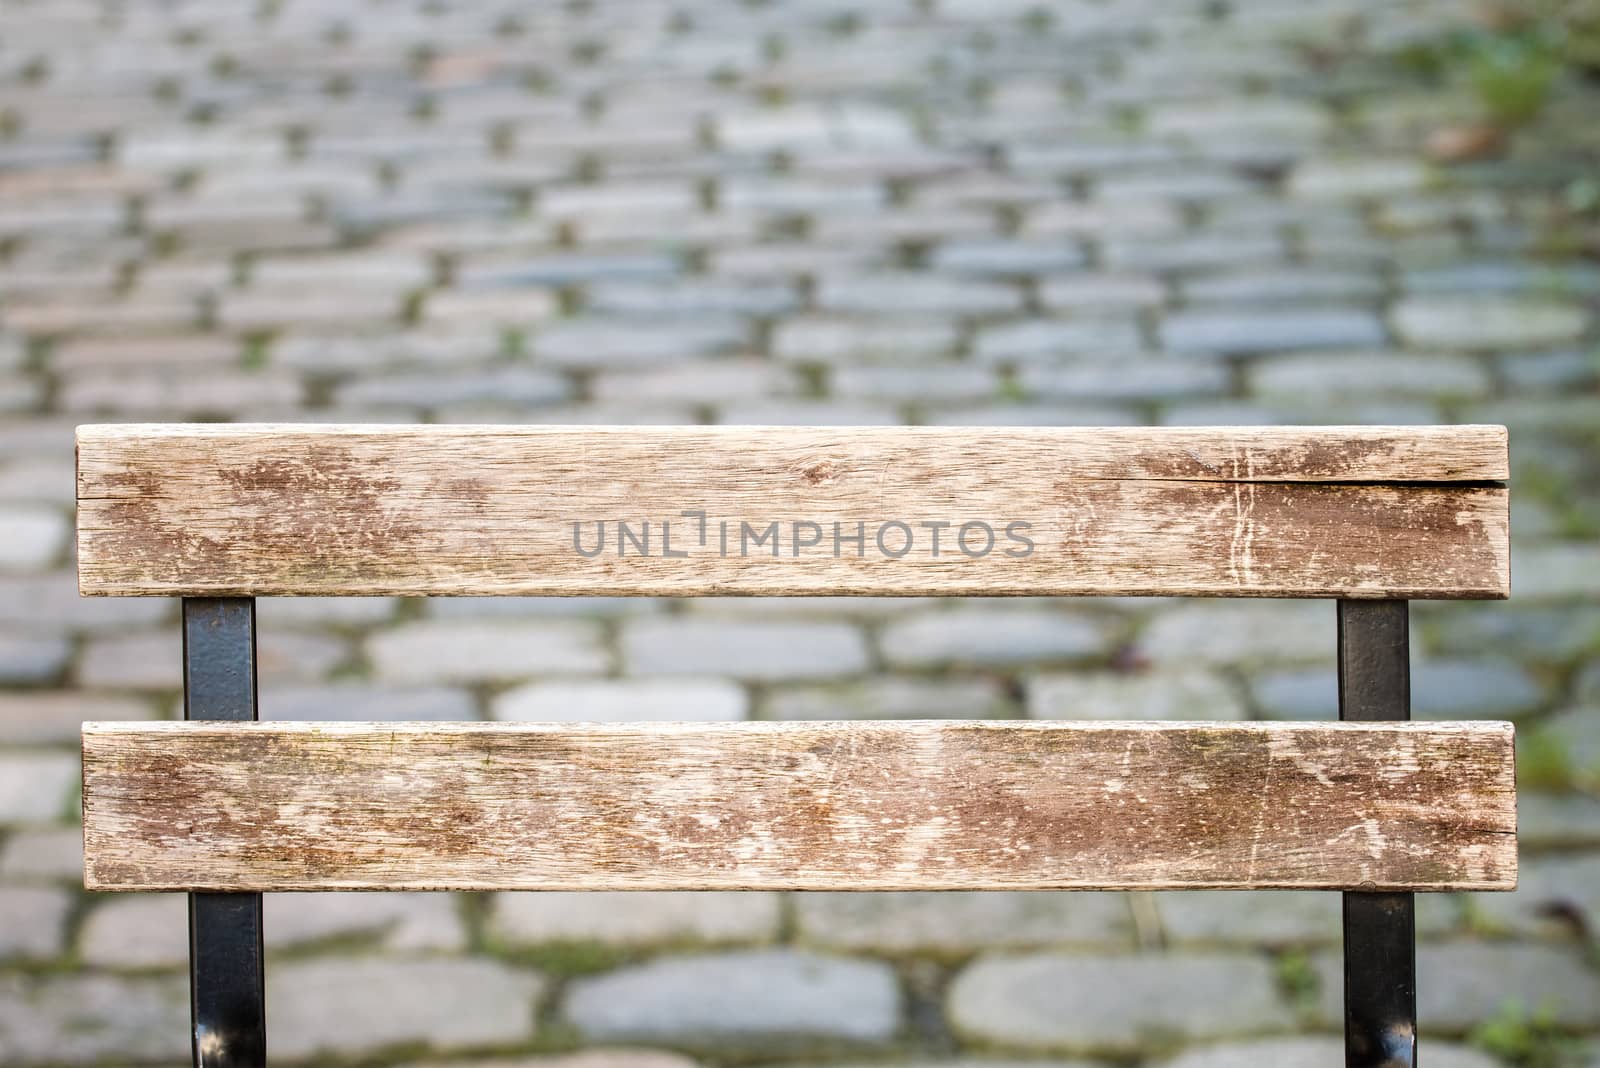 grunge wooden back of a chair, stoned path background